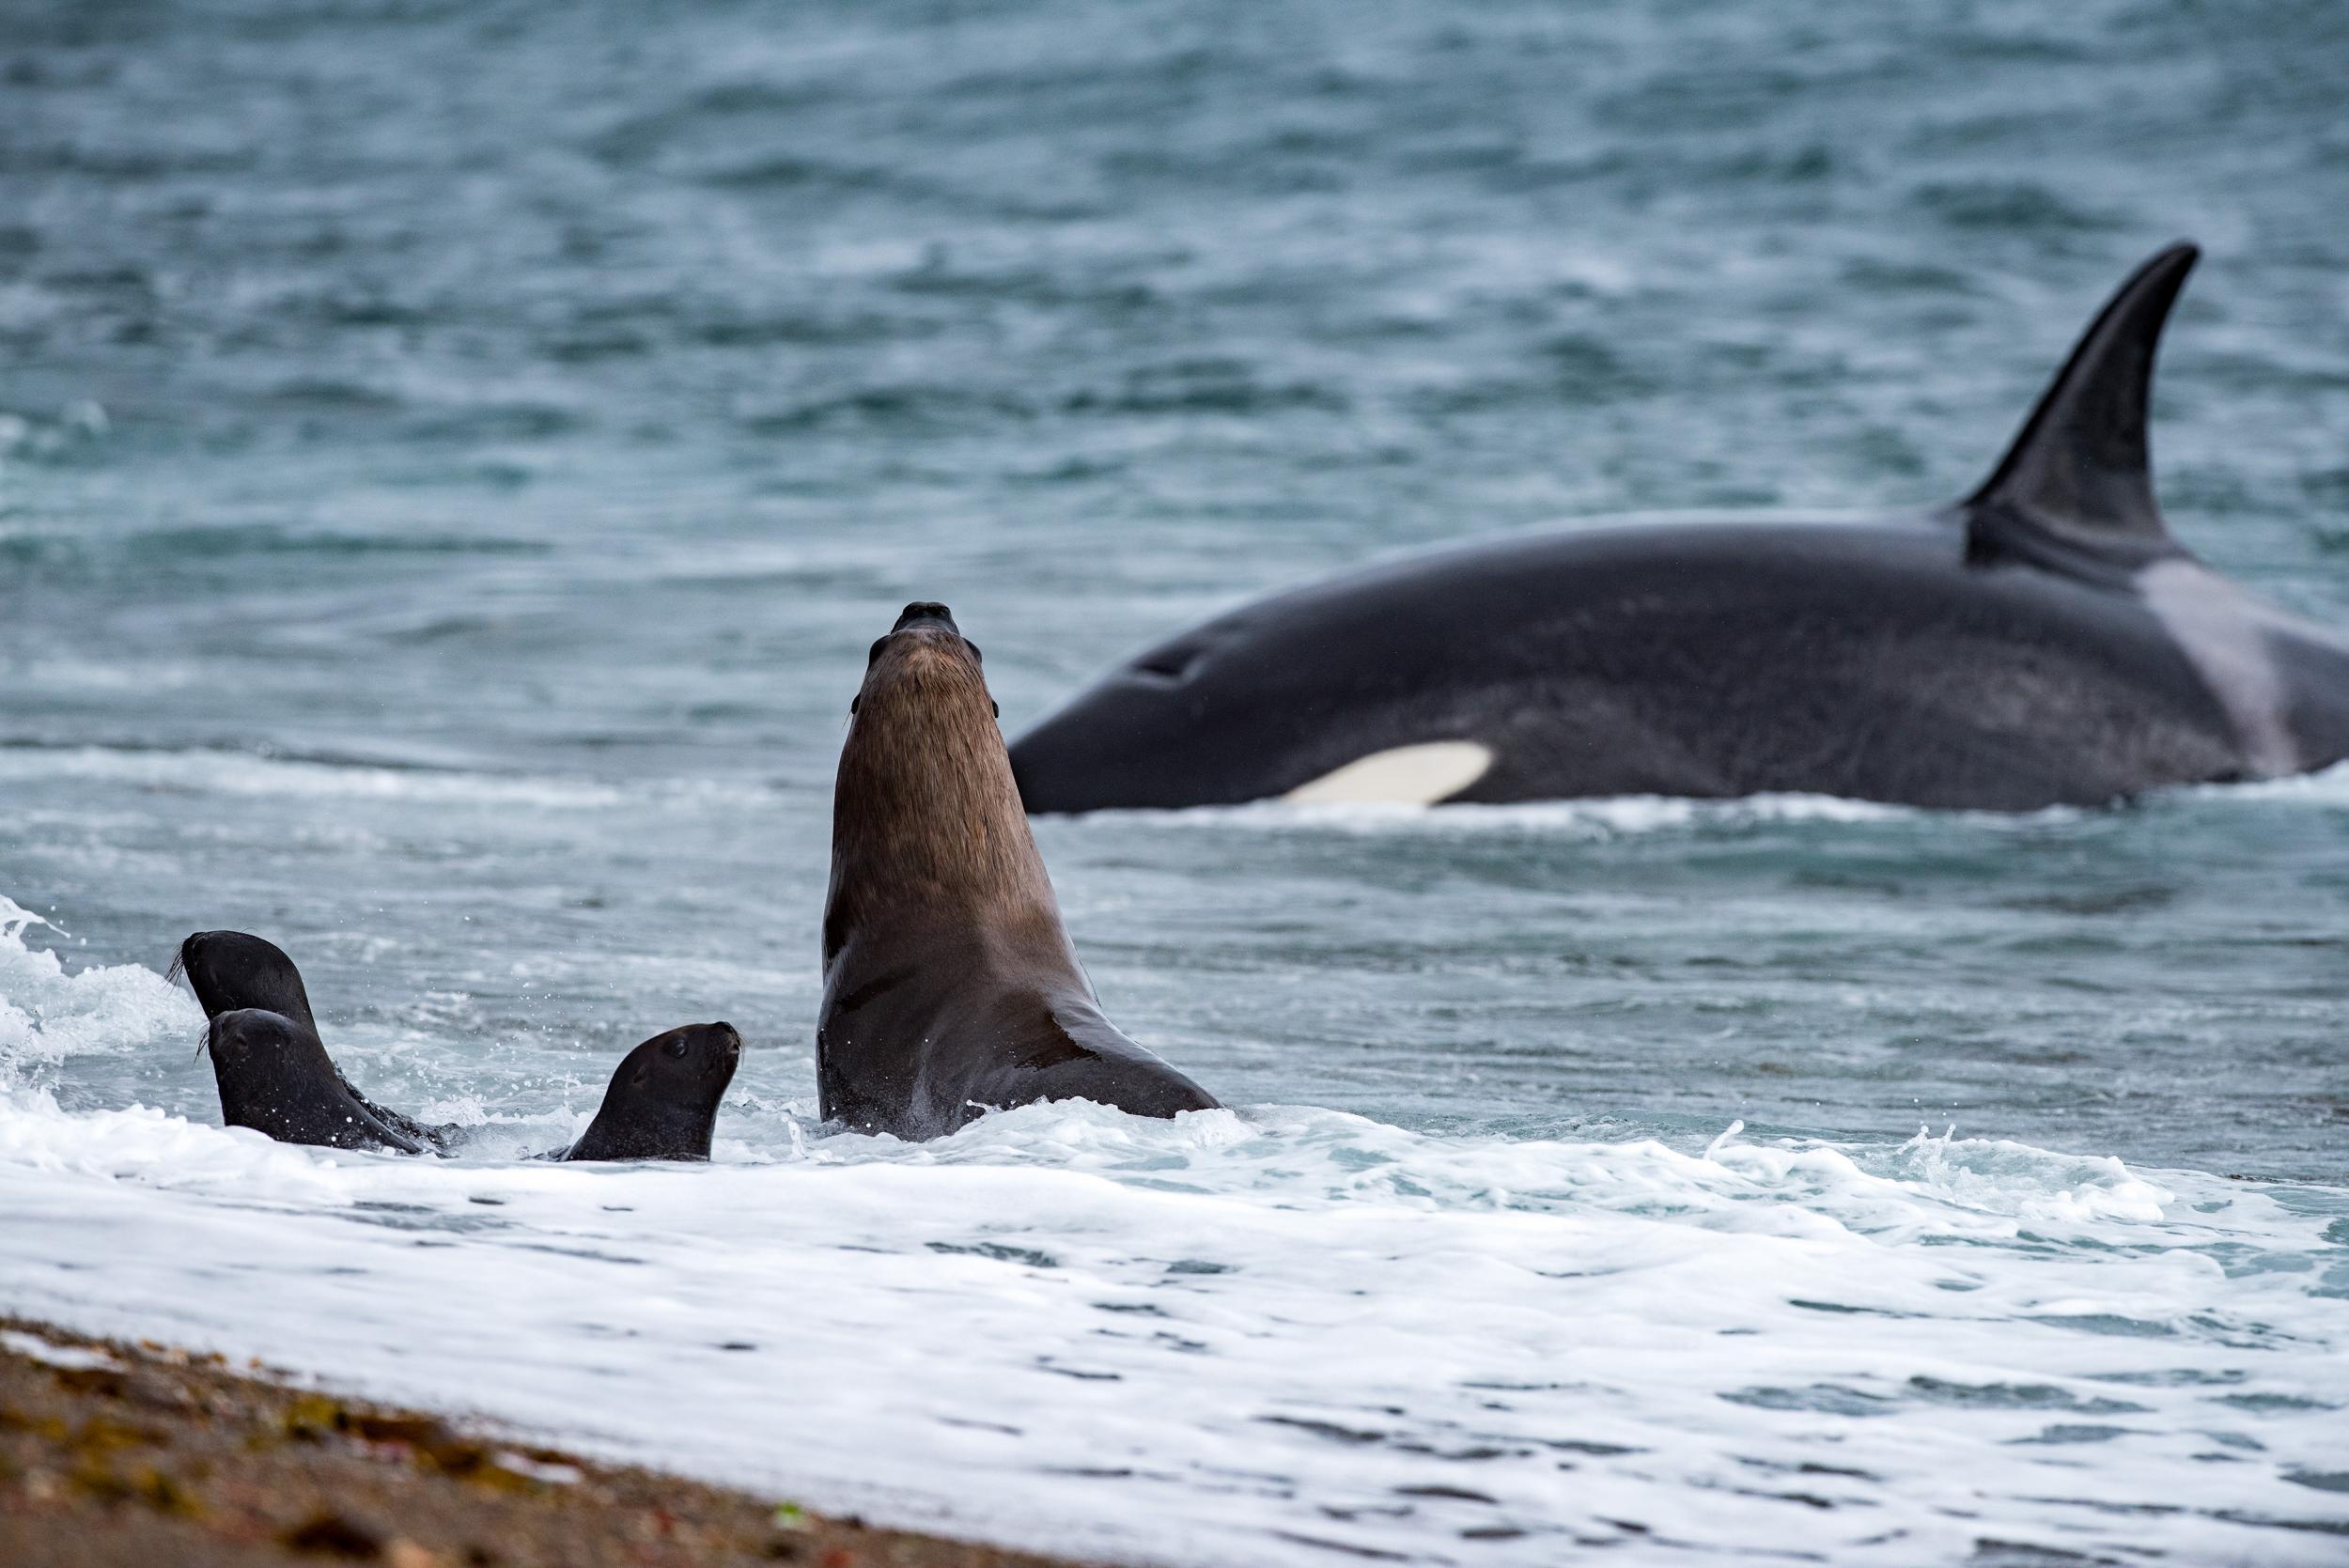 There are many reasons to visit Patagonia – watching orcas preying on seals among them